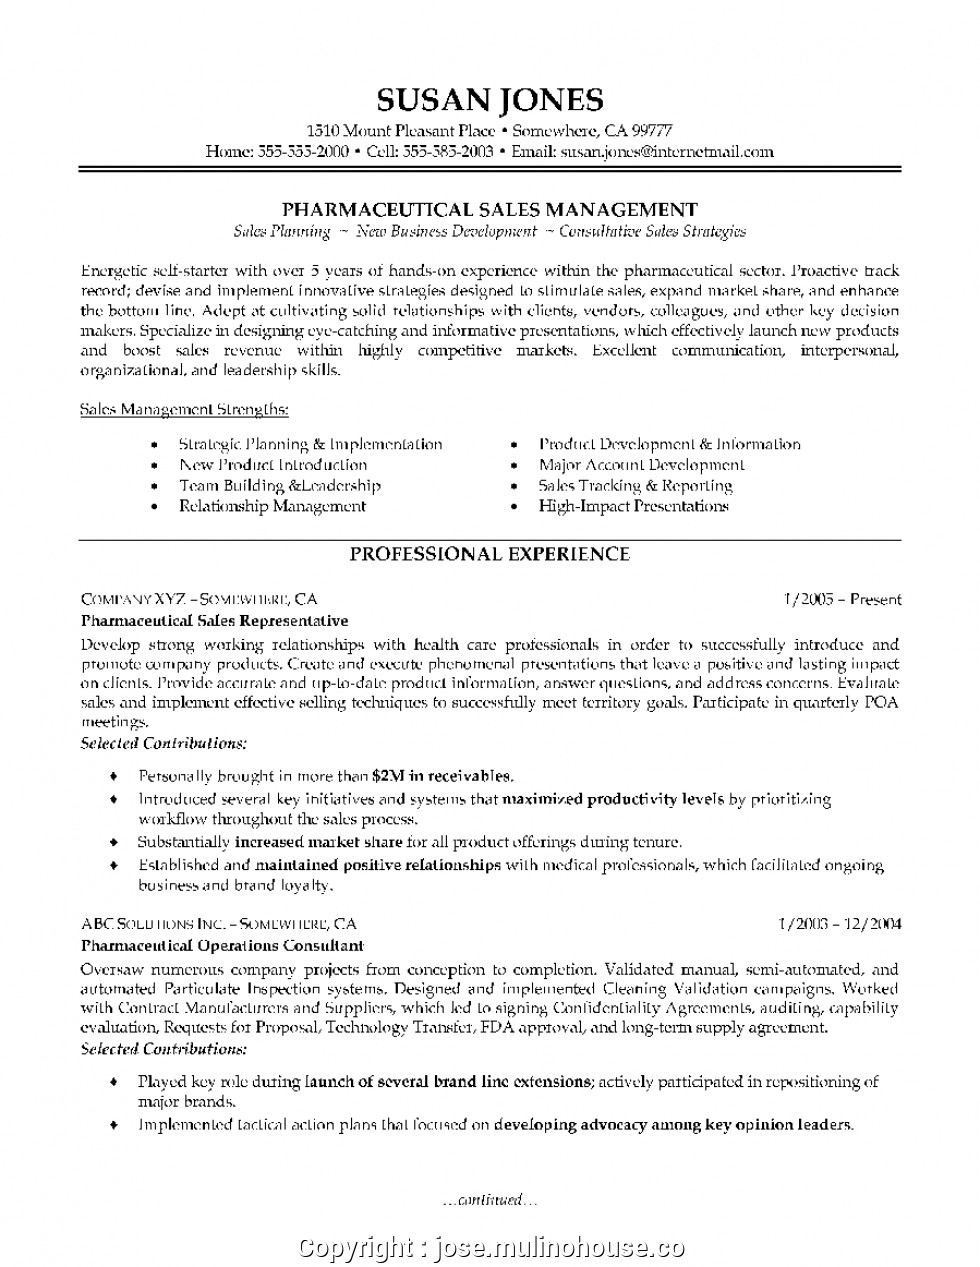 professional sales manager profile resume